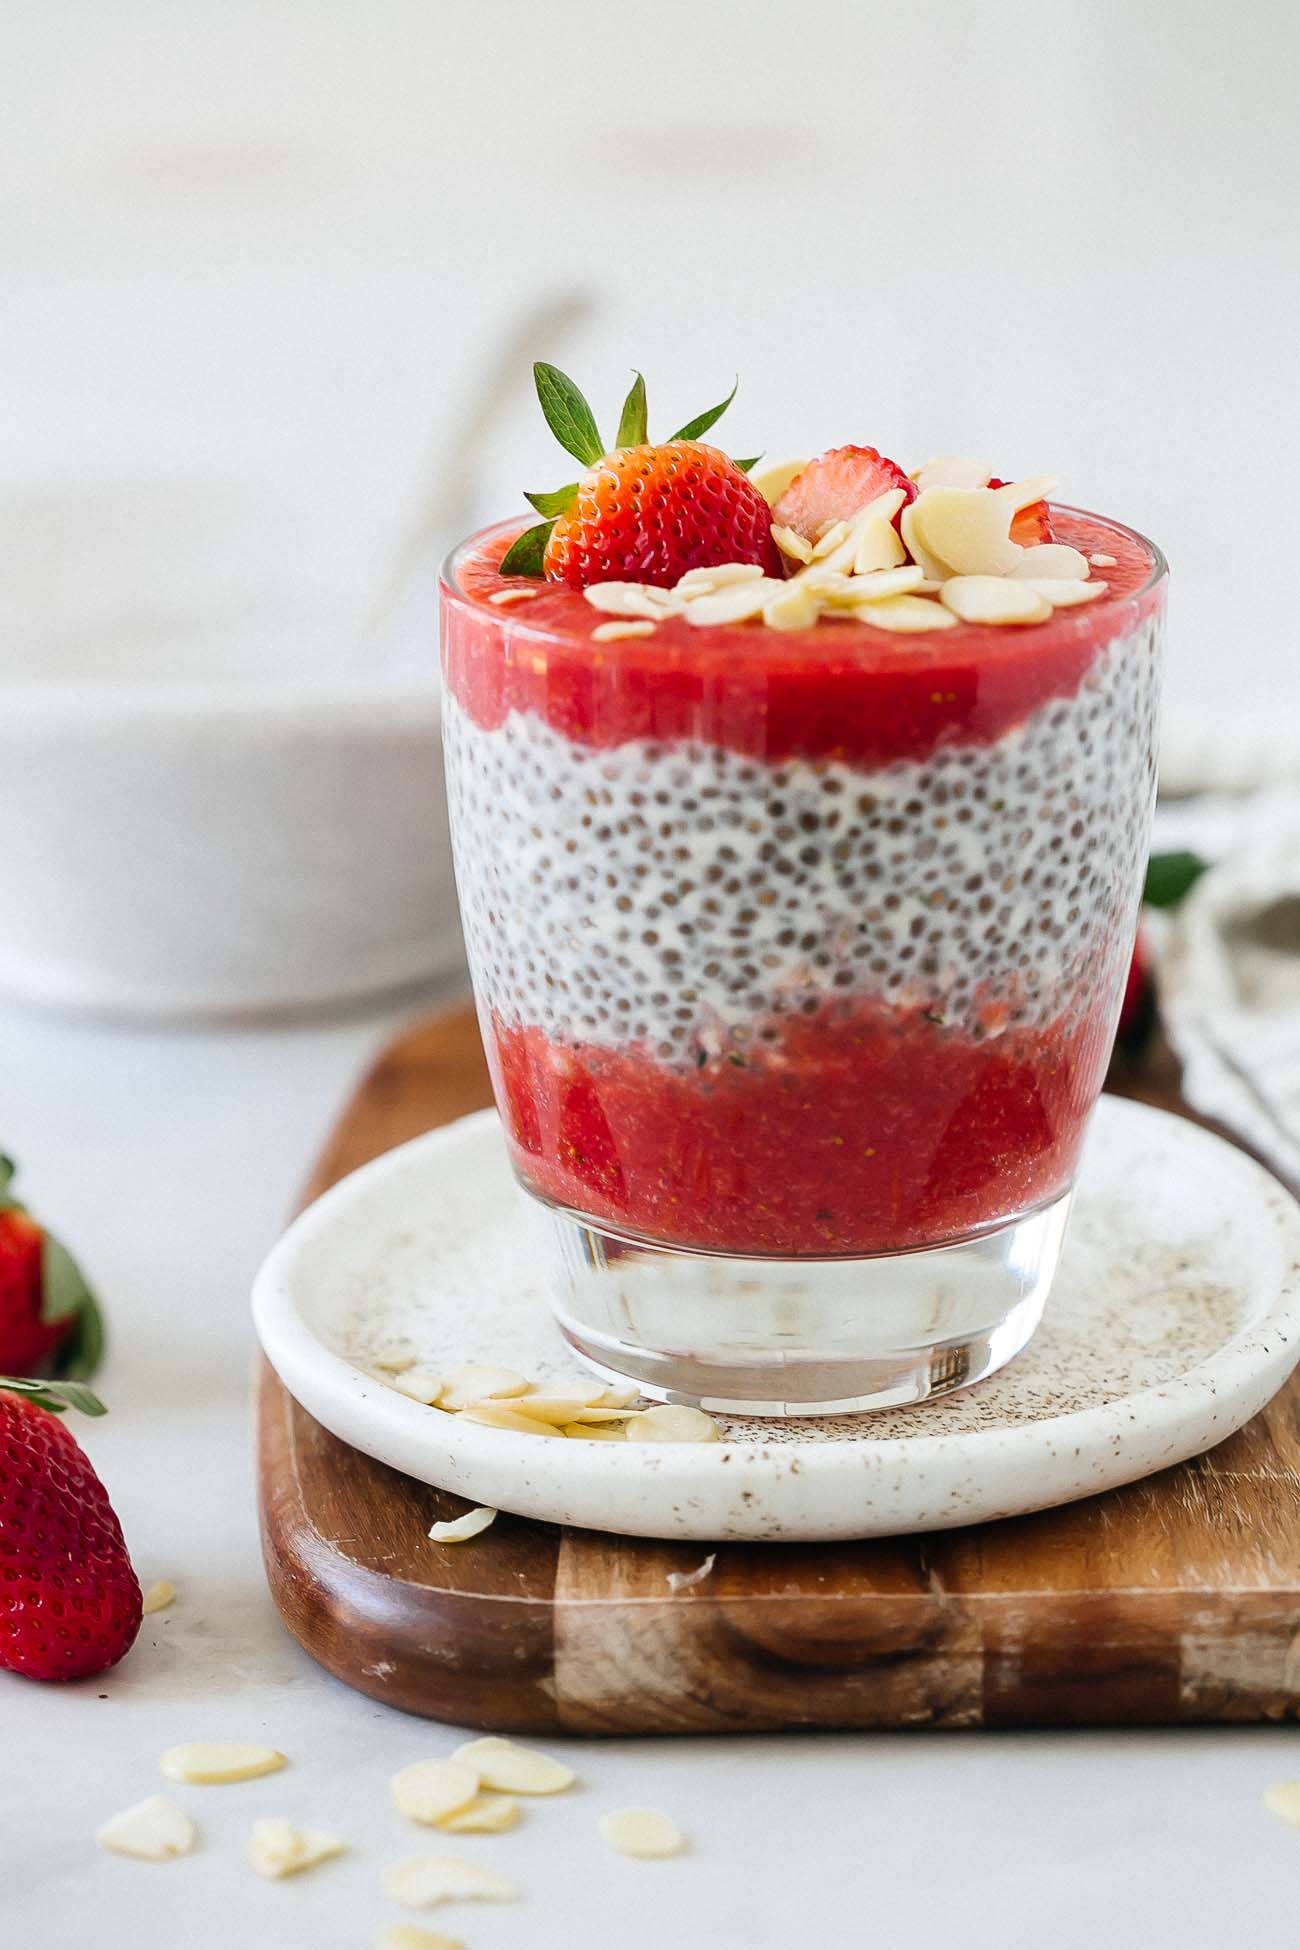 Strawberry chia seed pudding with strawberries and almonds on top.